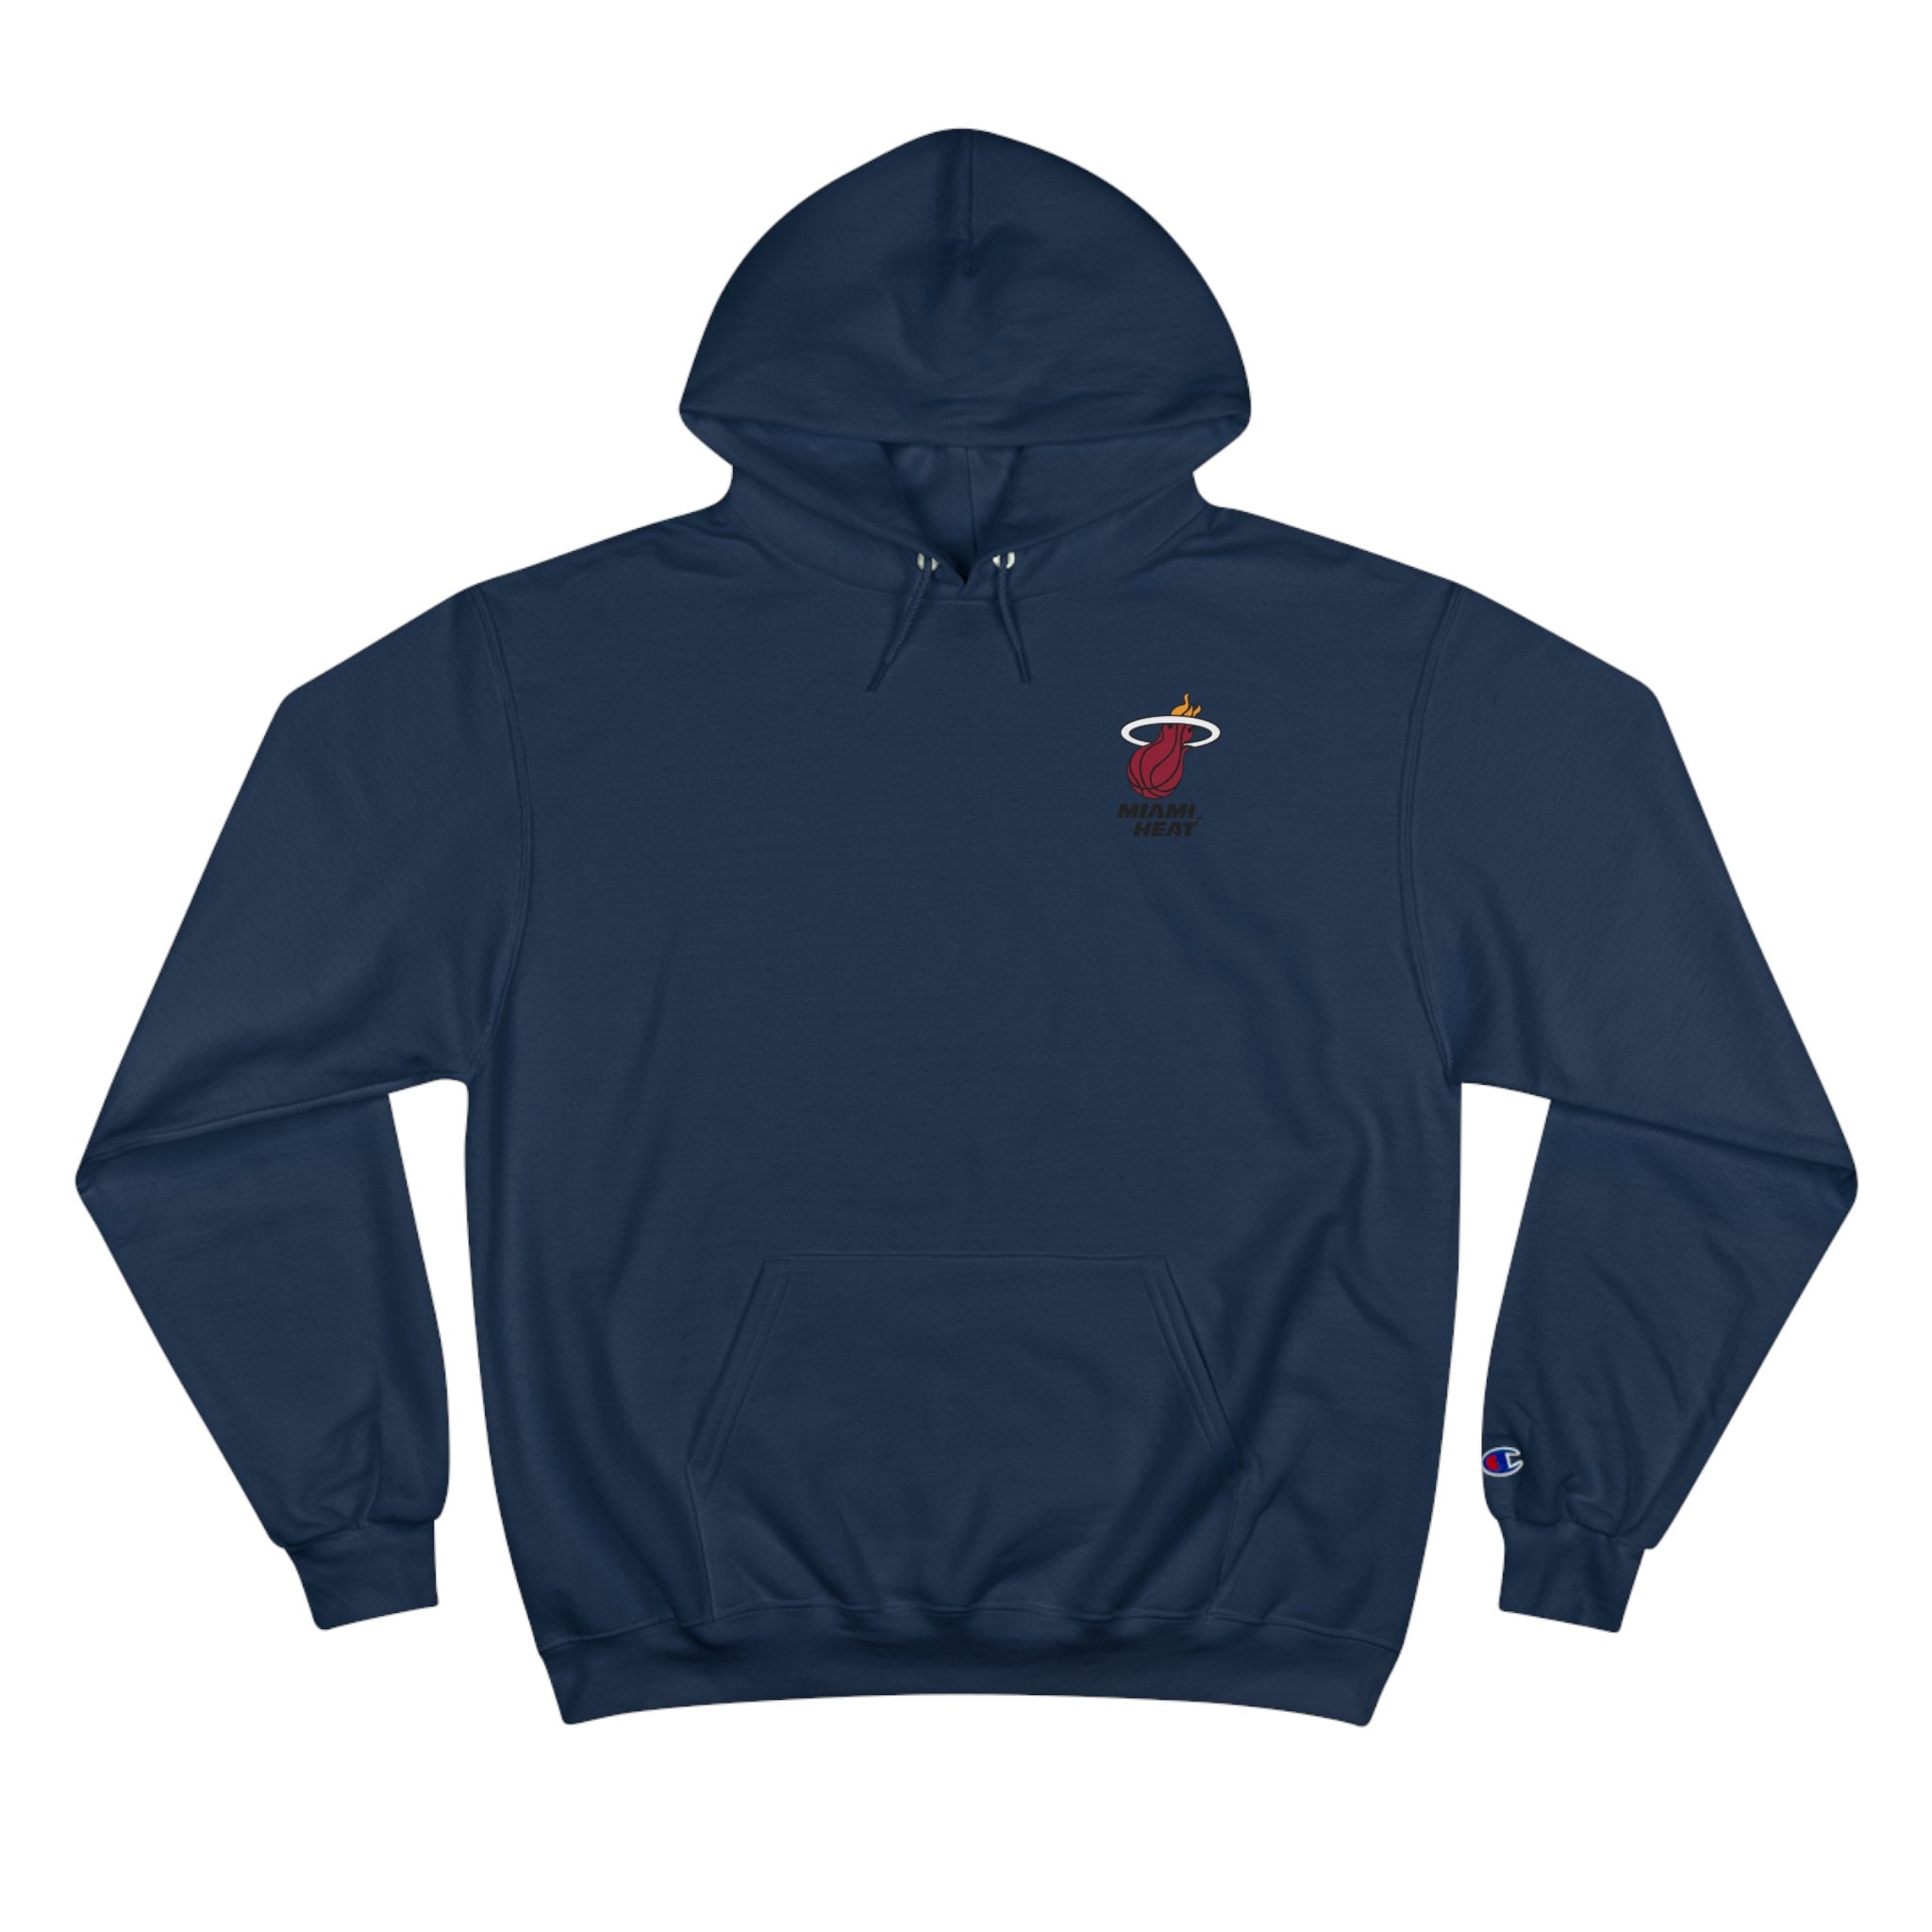 Miami Heat Logo Hoodie from Homage. | Ash | Vintage Apparel from Homage.